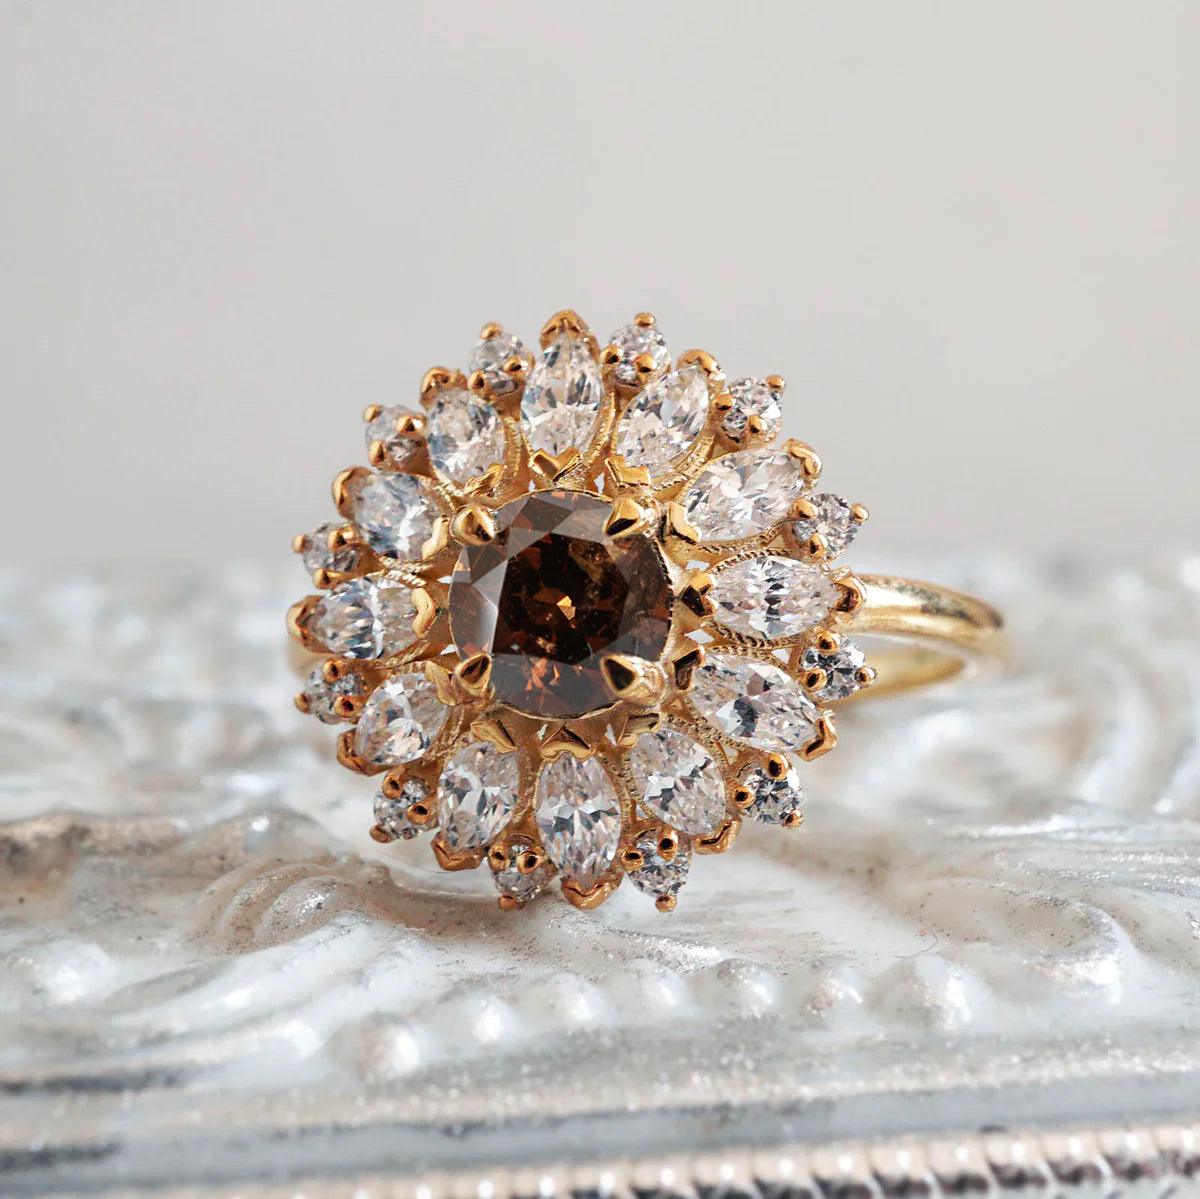 Limited Edition: Dandelion Champagne Diamond Ring in 14K and 18K Gold